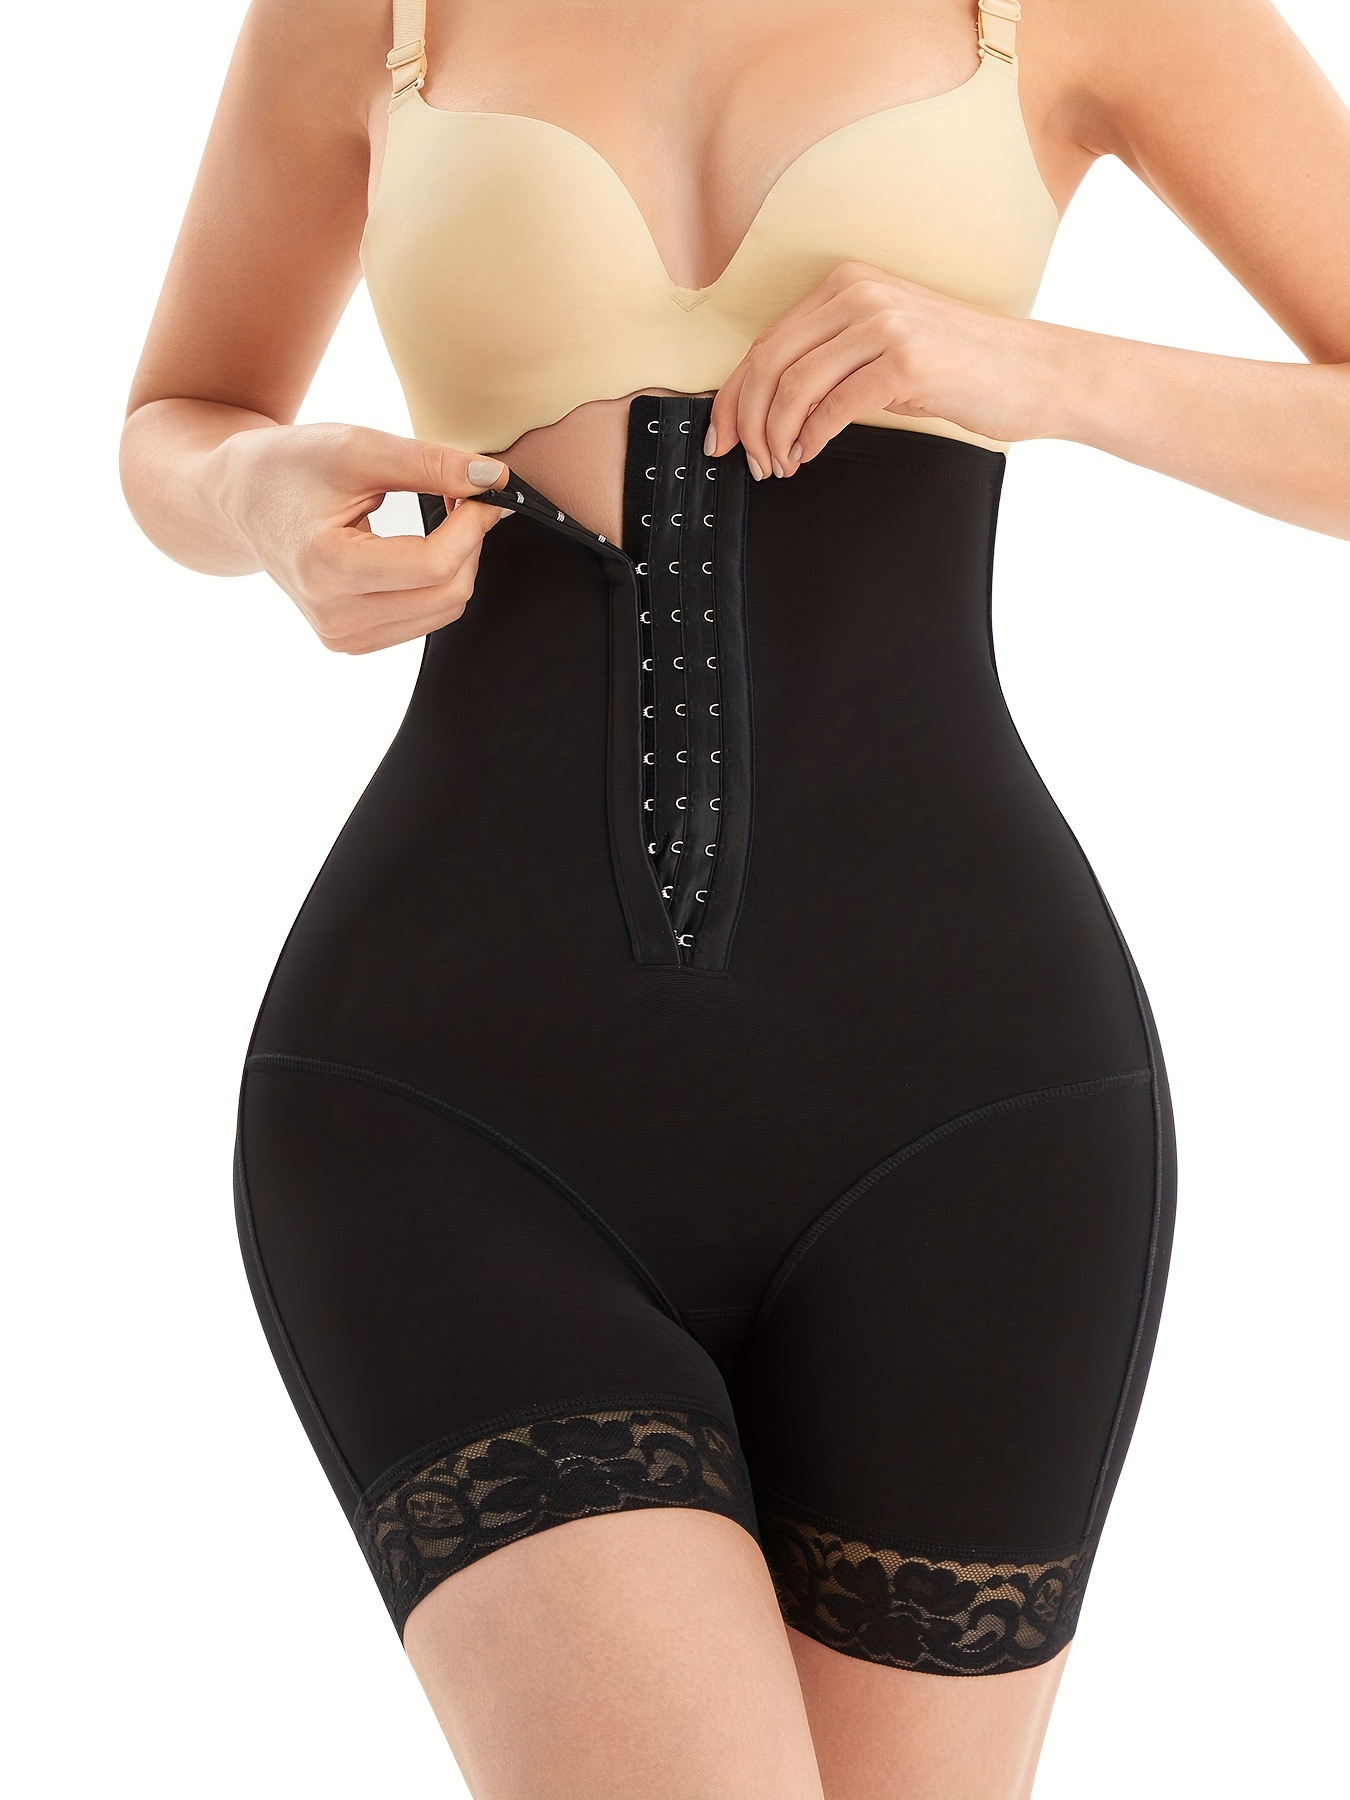 Bbl Shorts Women Shapewear Butt Lifter With Adjustable Hook And